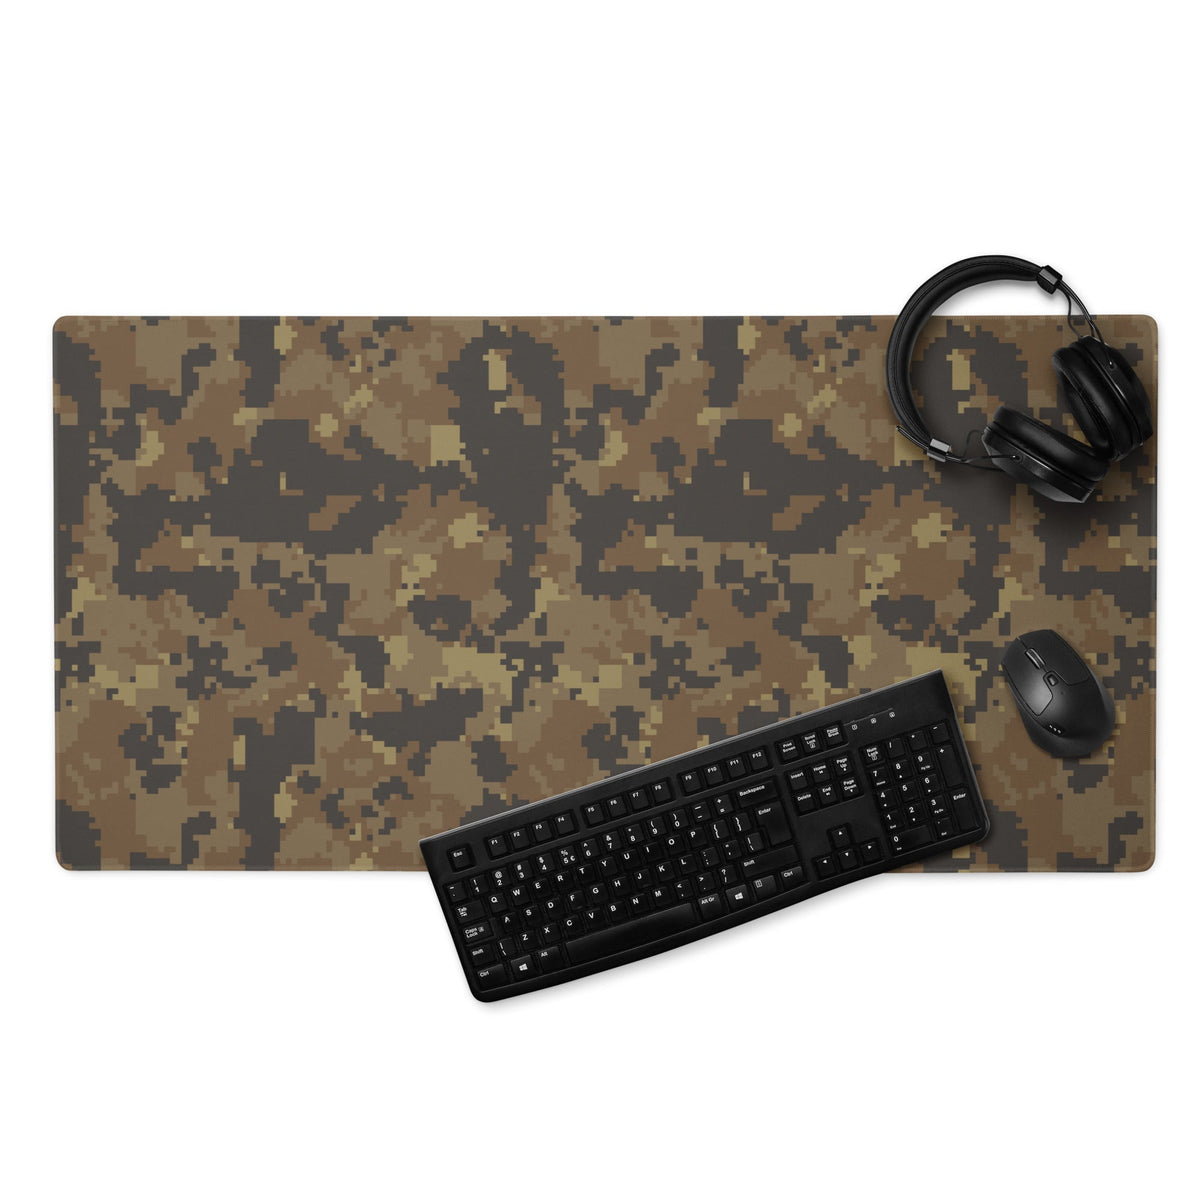 Mexican Naval Infantry Digital Desert CAMO Gaming mouse pad - 36″×18″